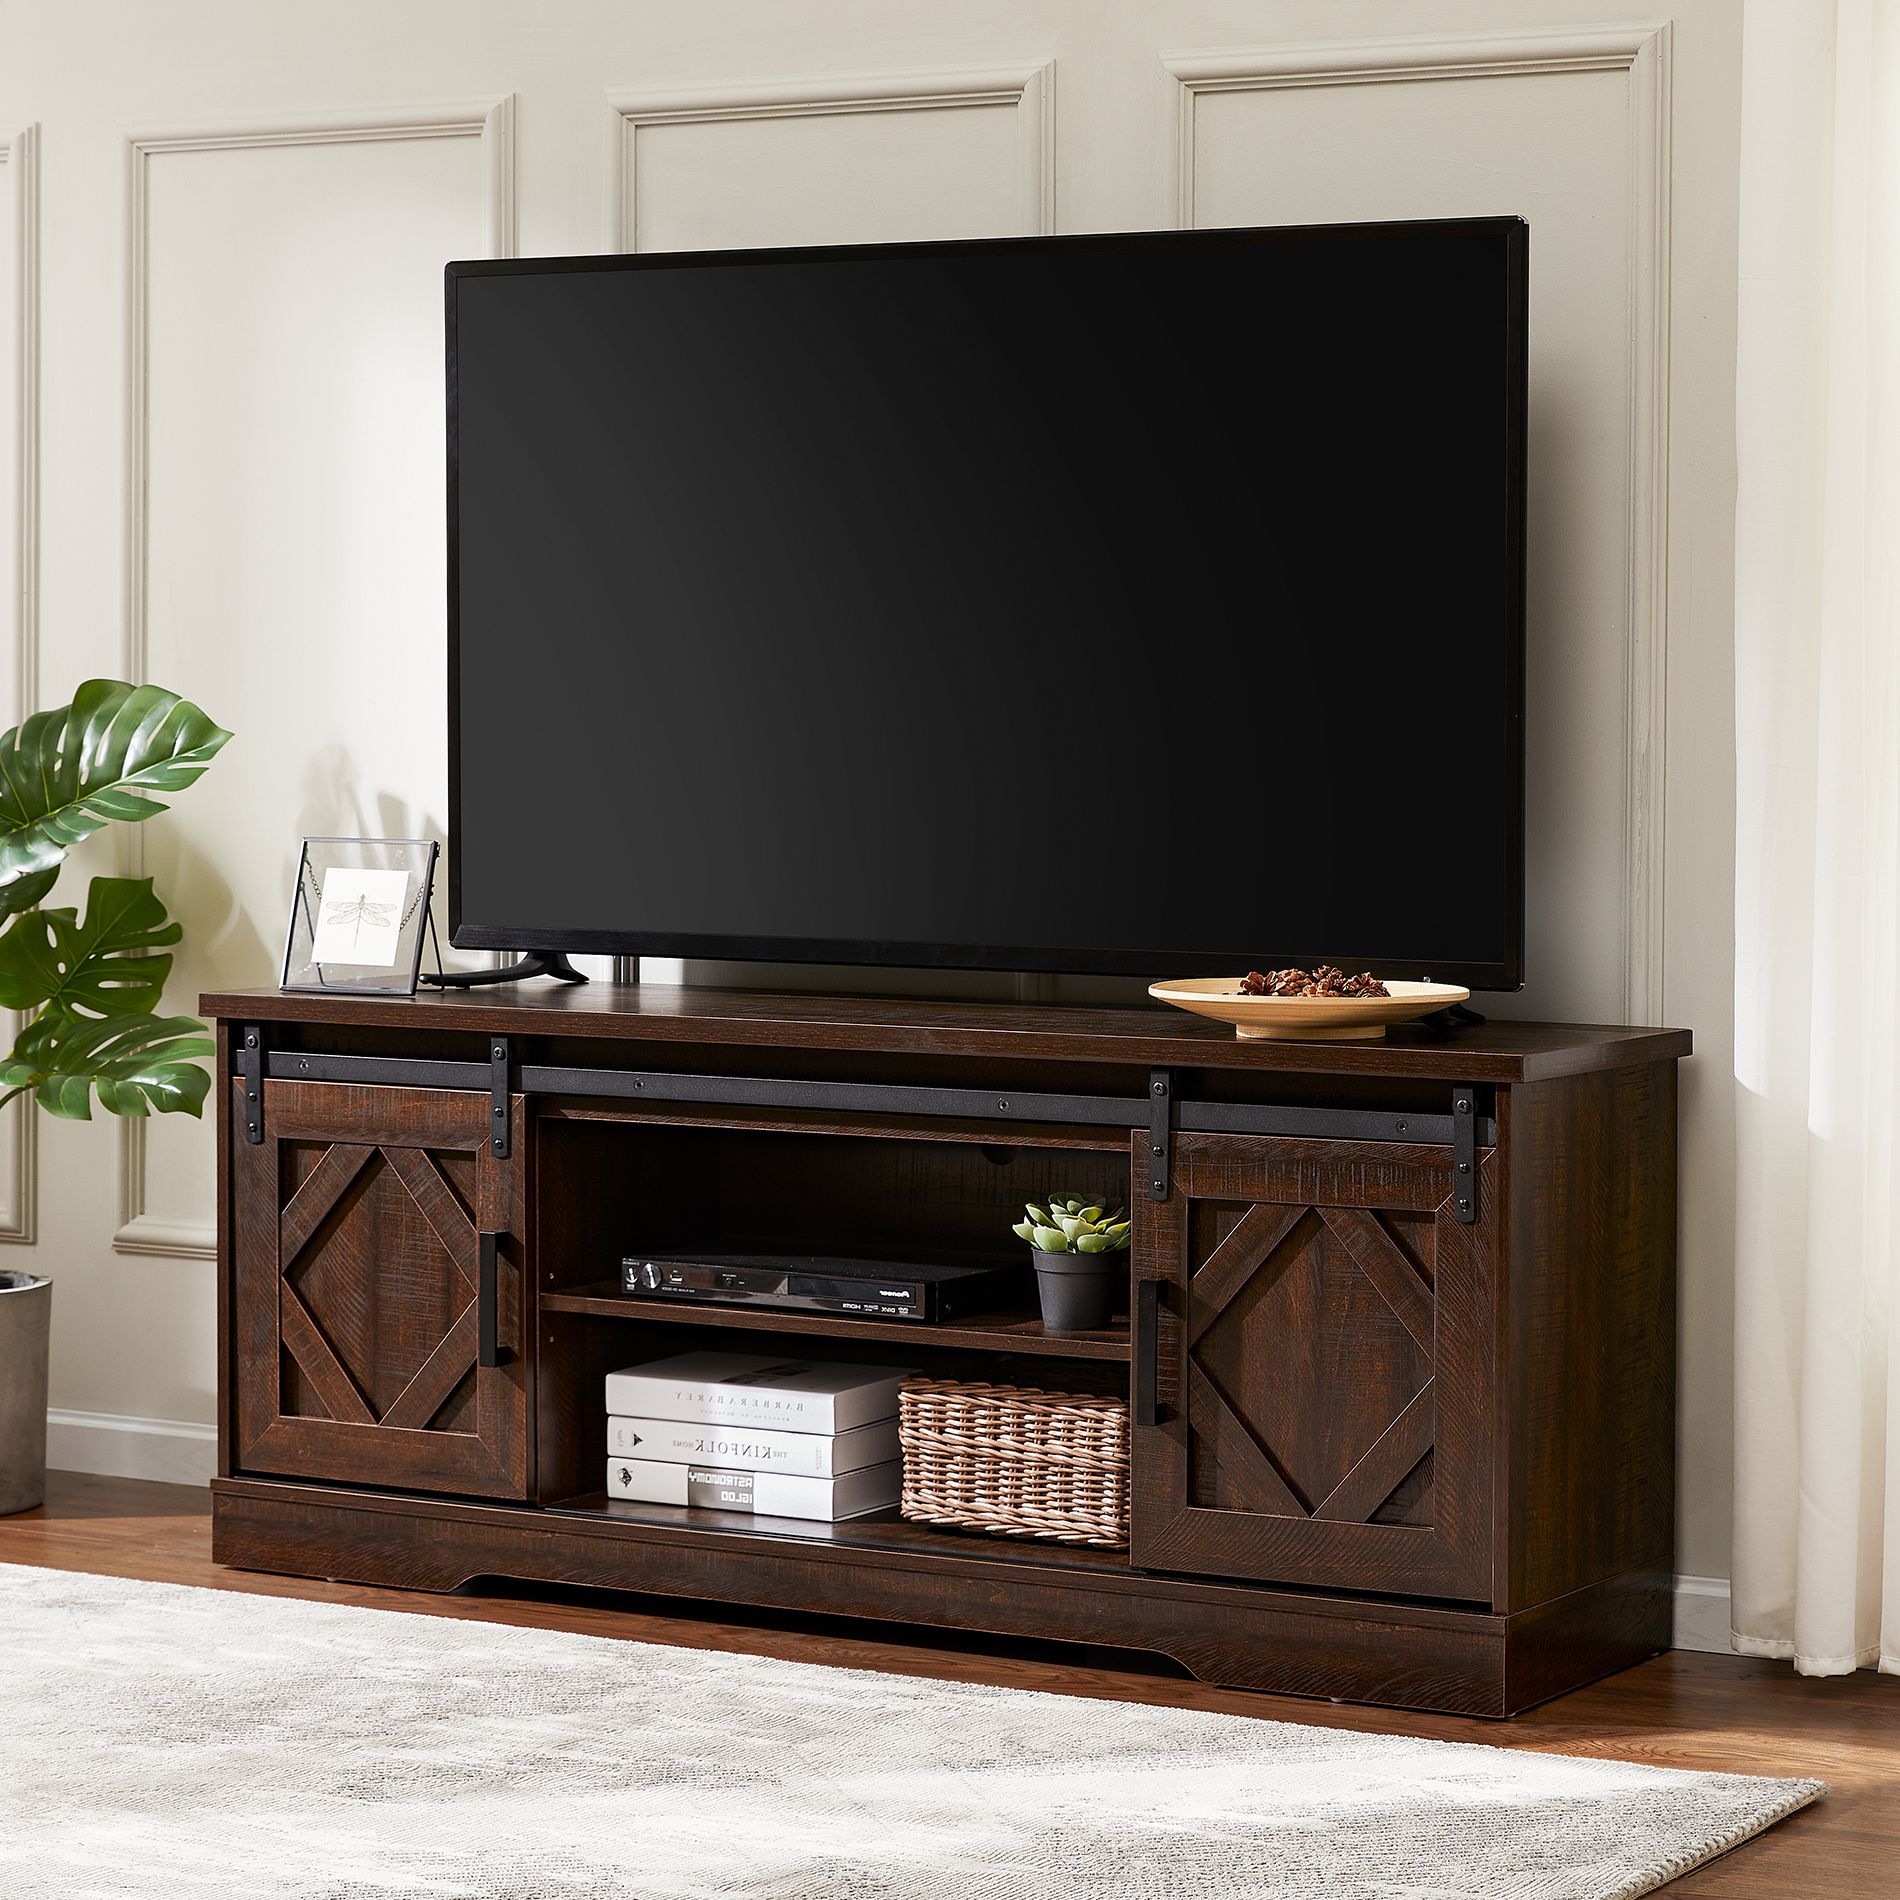 Wampat Sliding Barn Door Tv Stand For 70 Inch Flat Screen With Mainor Tv Stands For Tvs Up To 70&quot; (View 1 of 15)